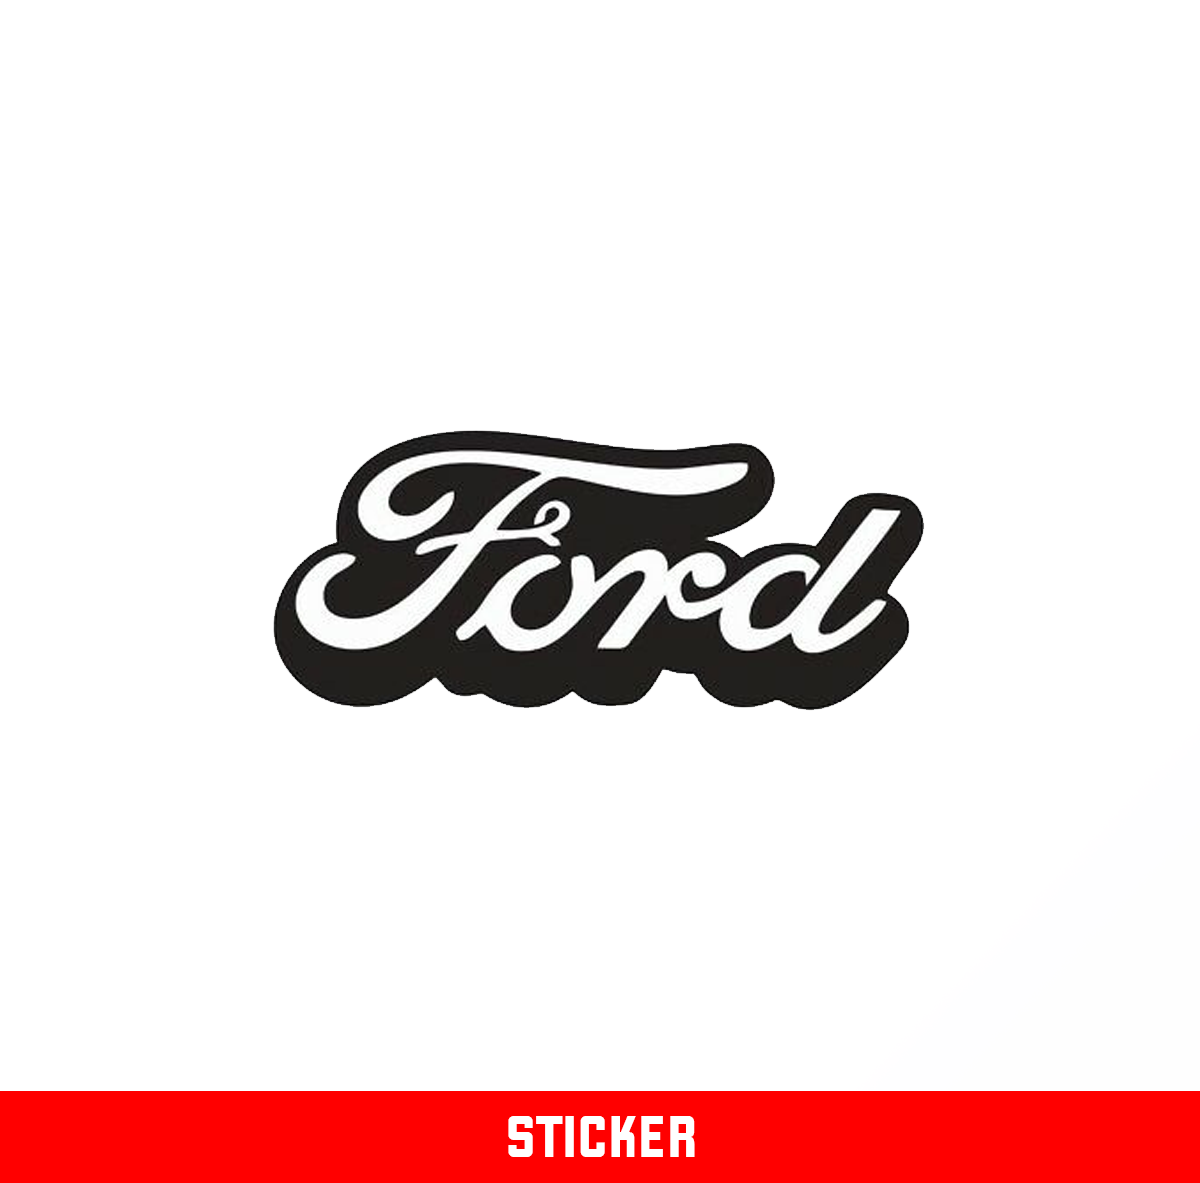 https://dopegfx.co.uk/wp-content/uploads/2020/02/Sticker-Ford90s.png